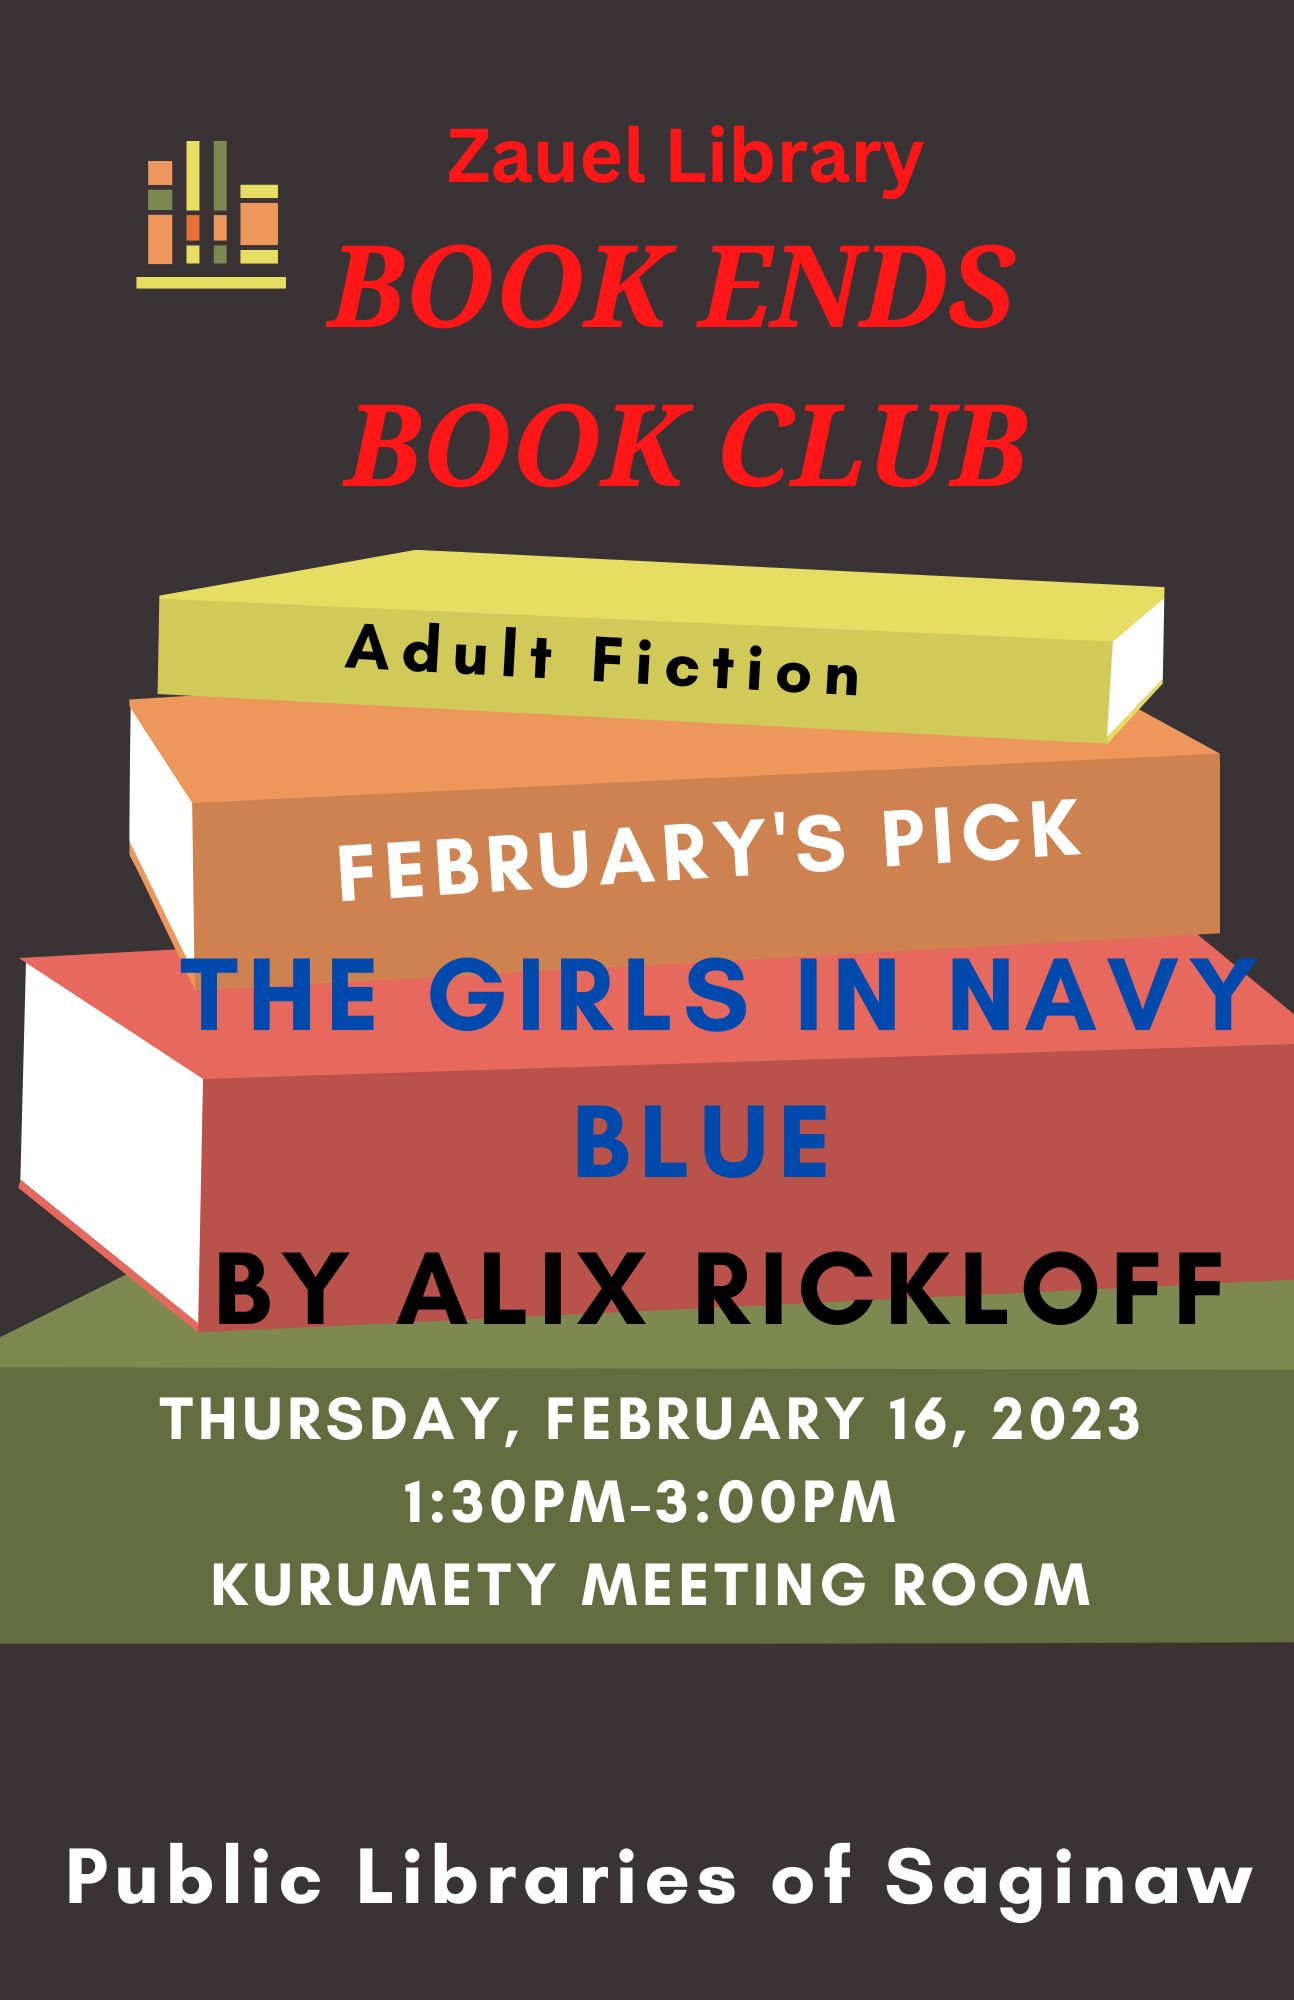 Book Ends February 16 The Girls in Navy Blue by Alix Rickloff